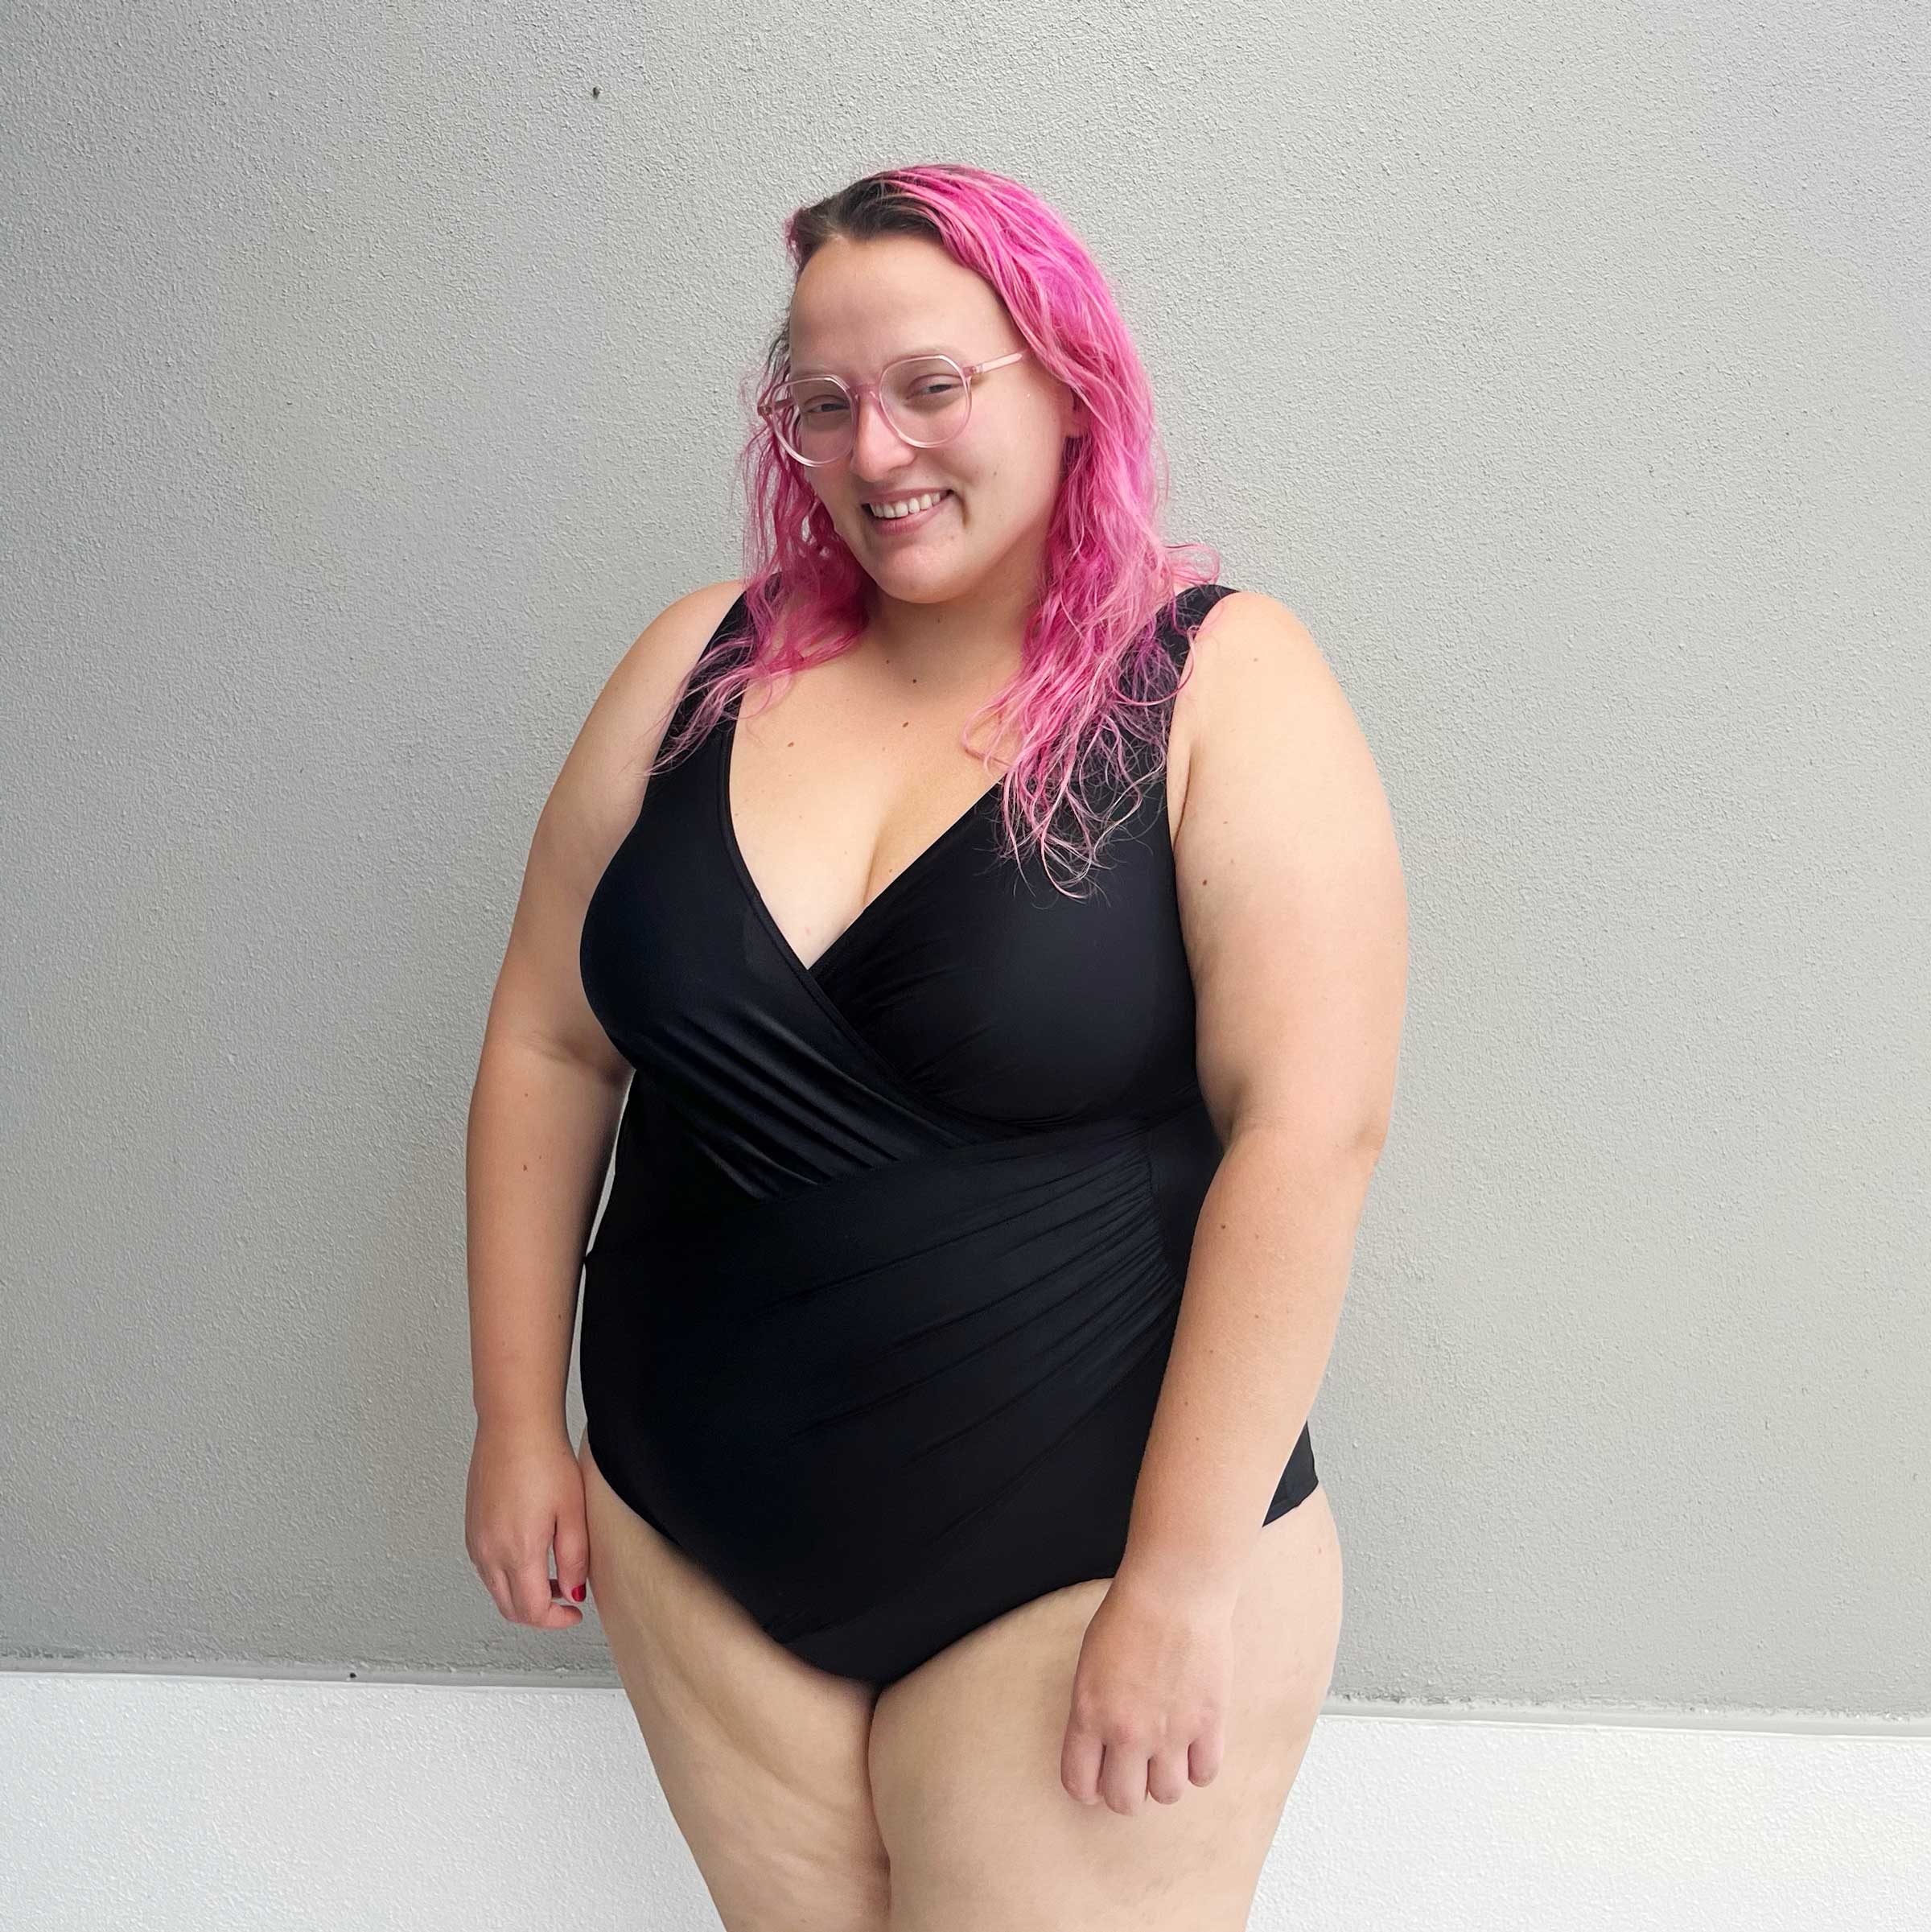 I'm plus-size with big boobs - here's my go-to brand for swimsuits